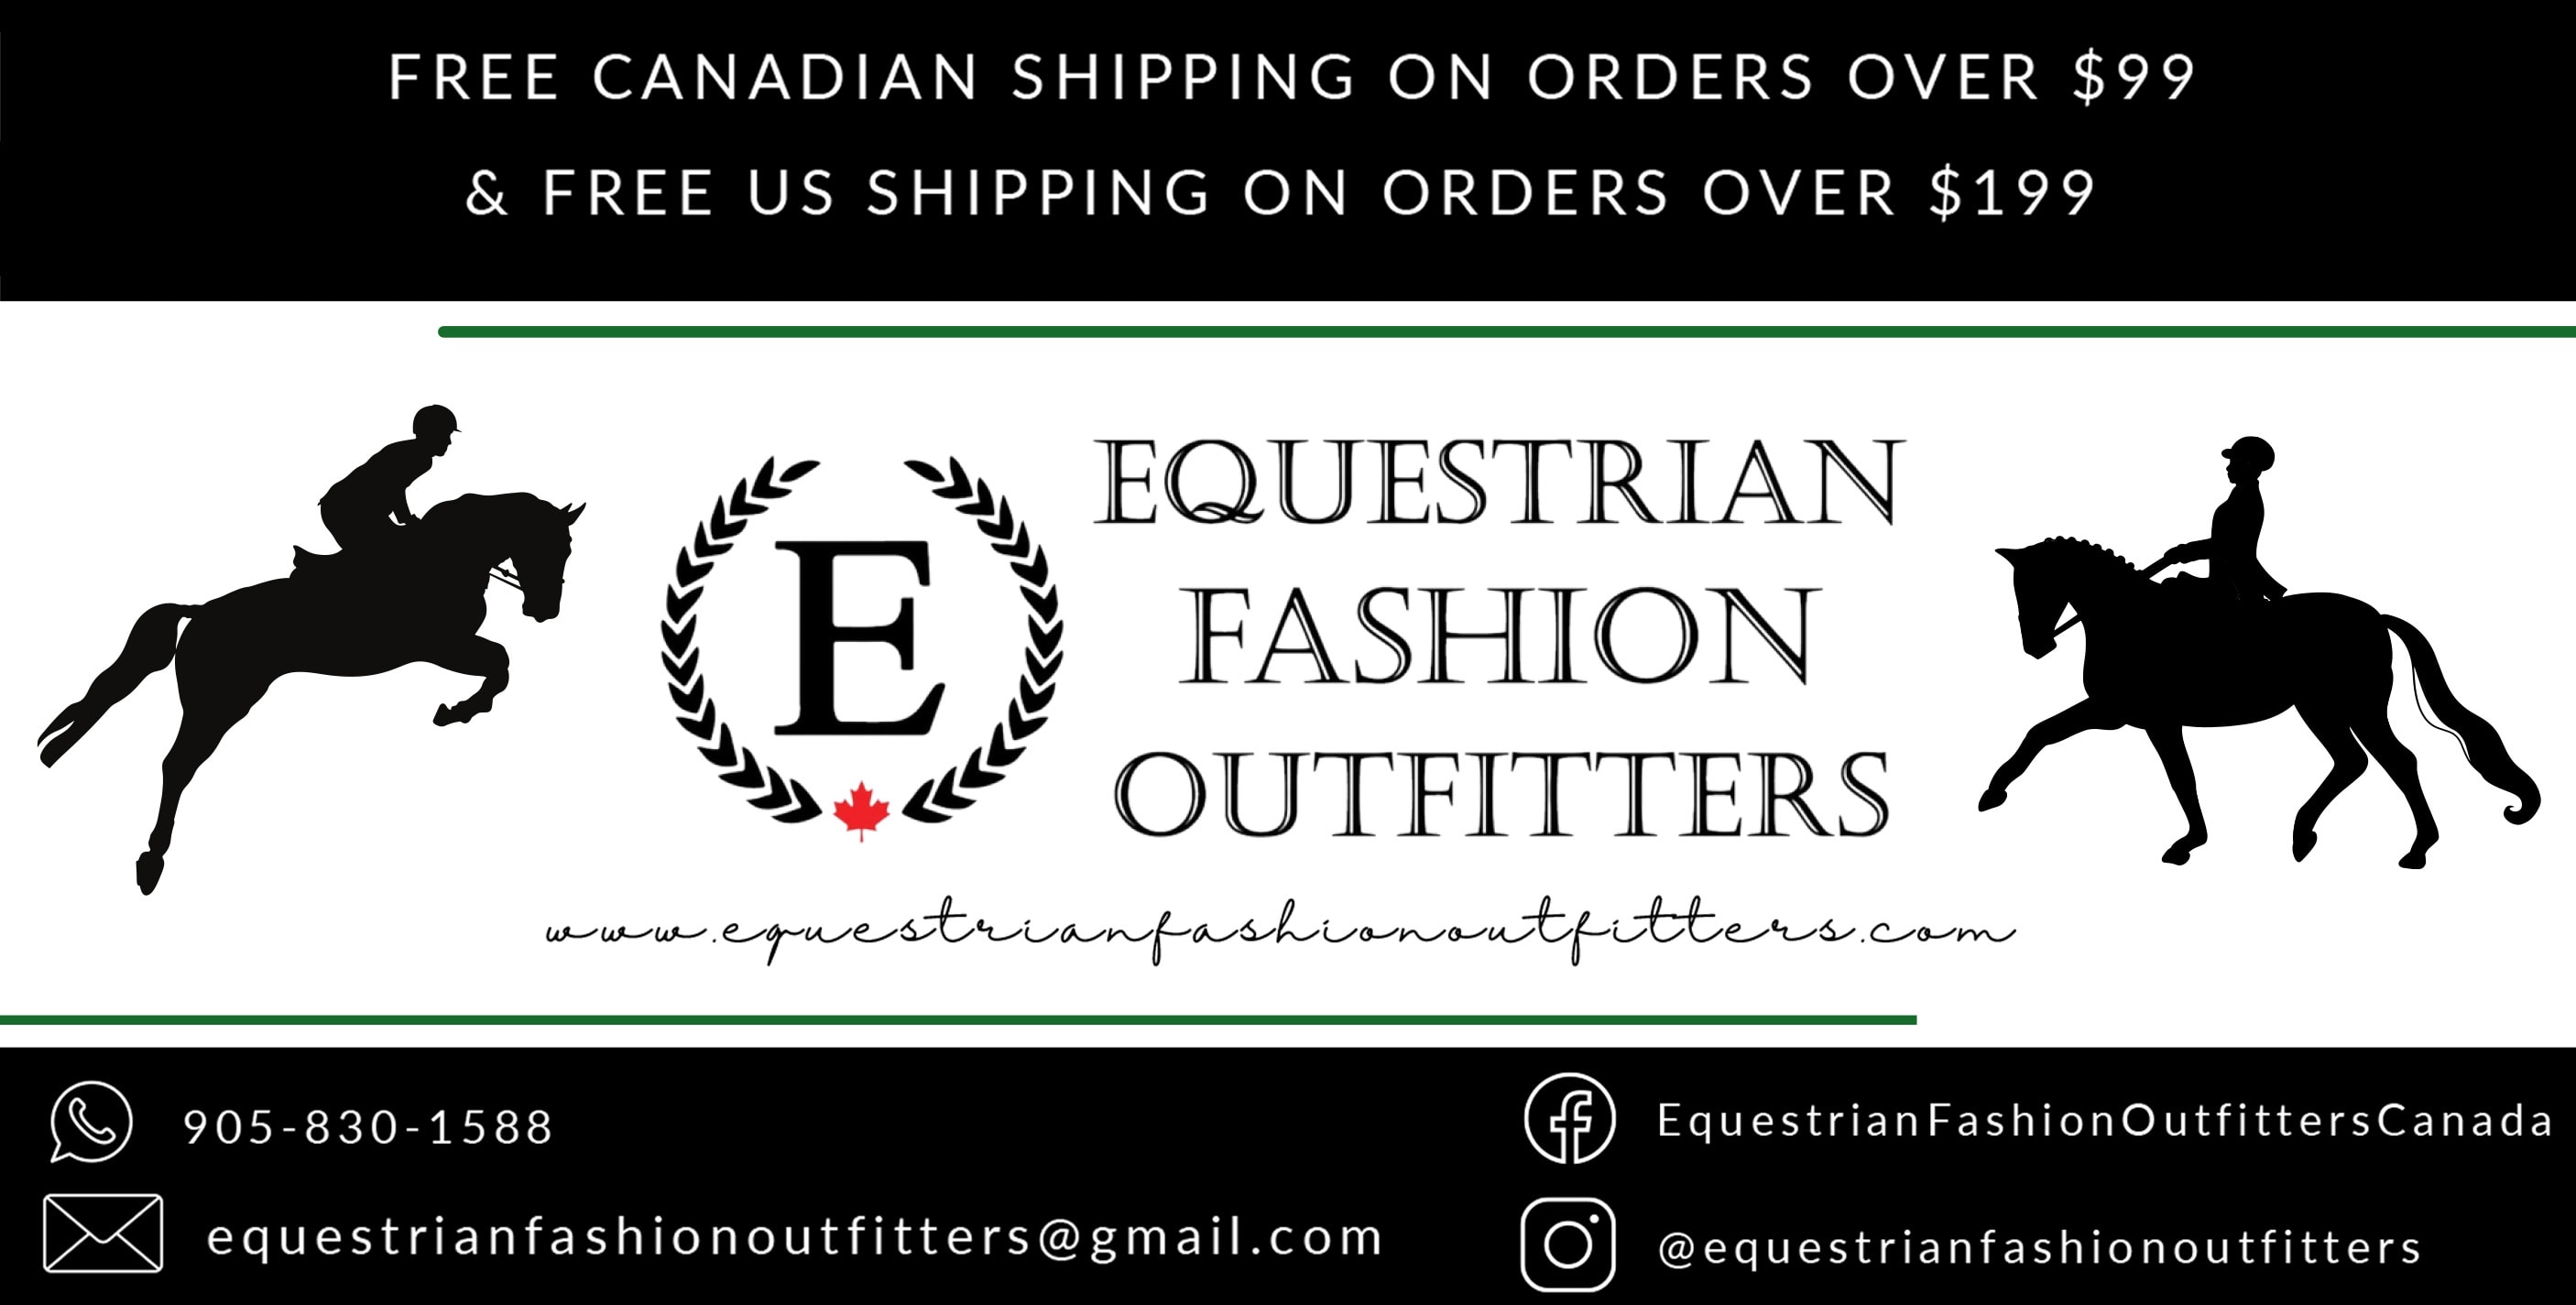 Equestrian Fashion Outfitters